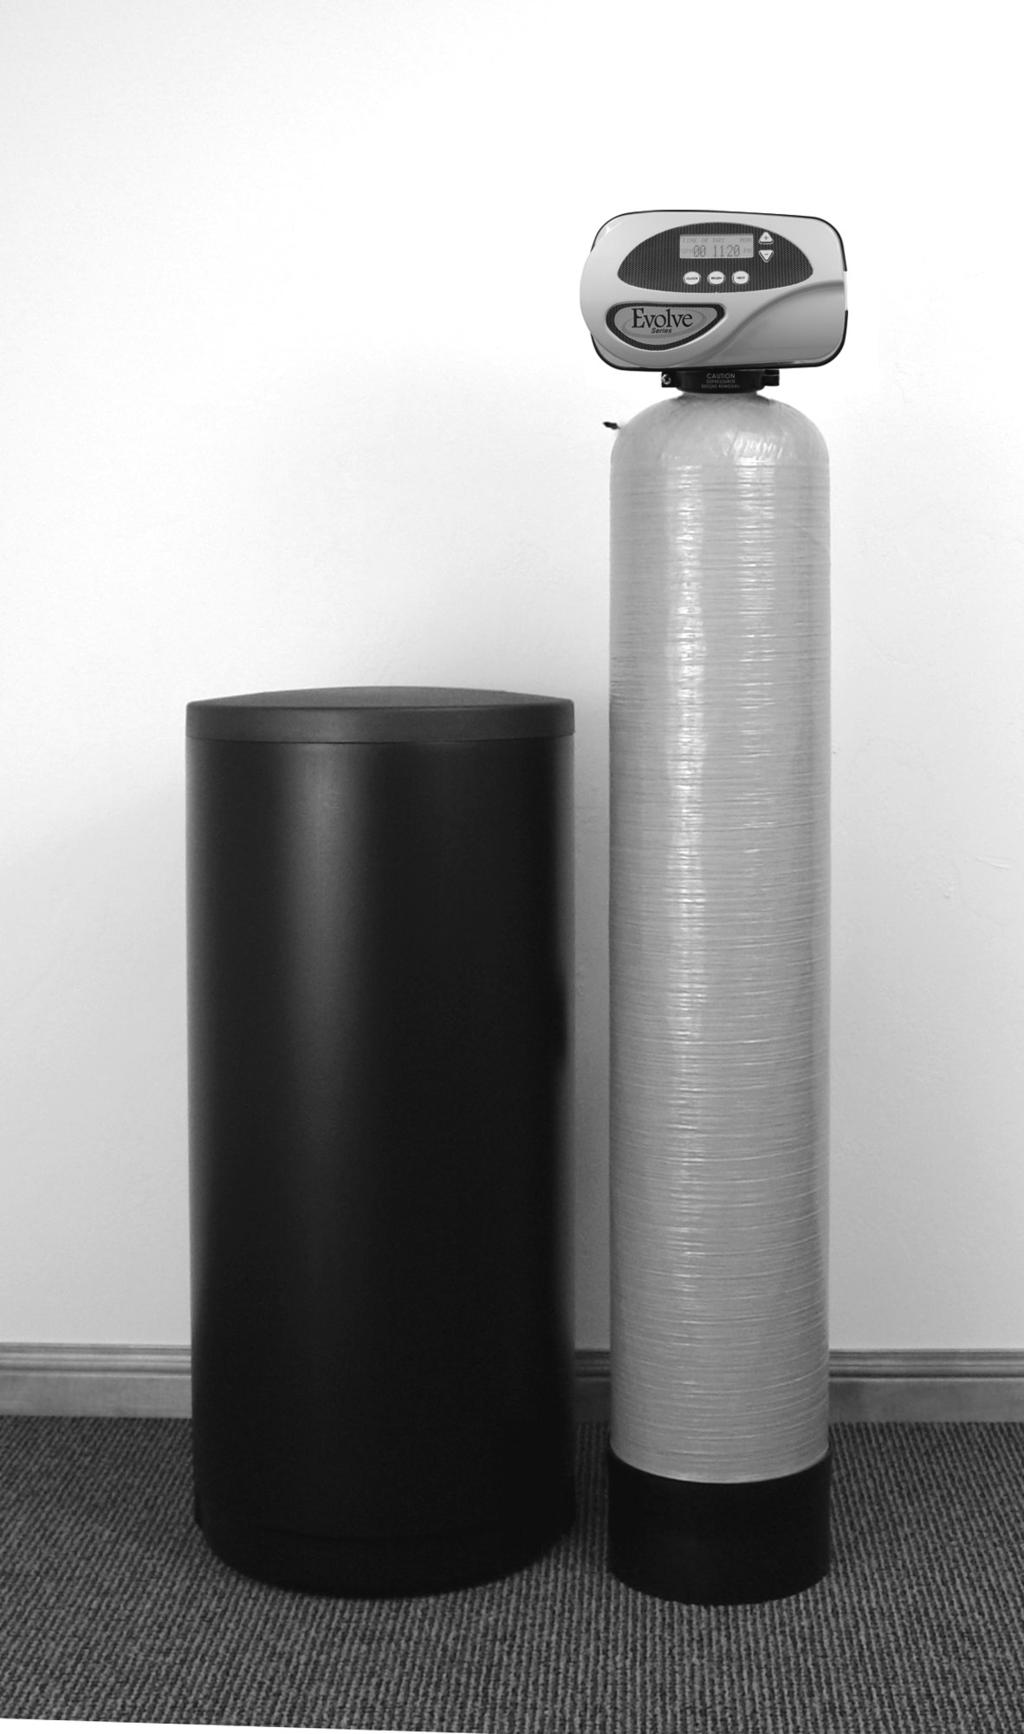 Evolve Series Water Softeners and Conditioners For